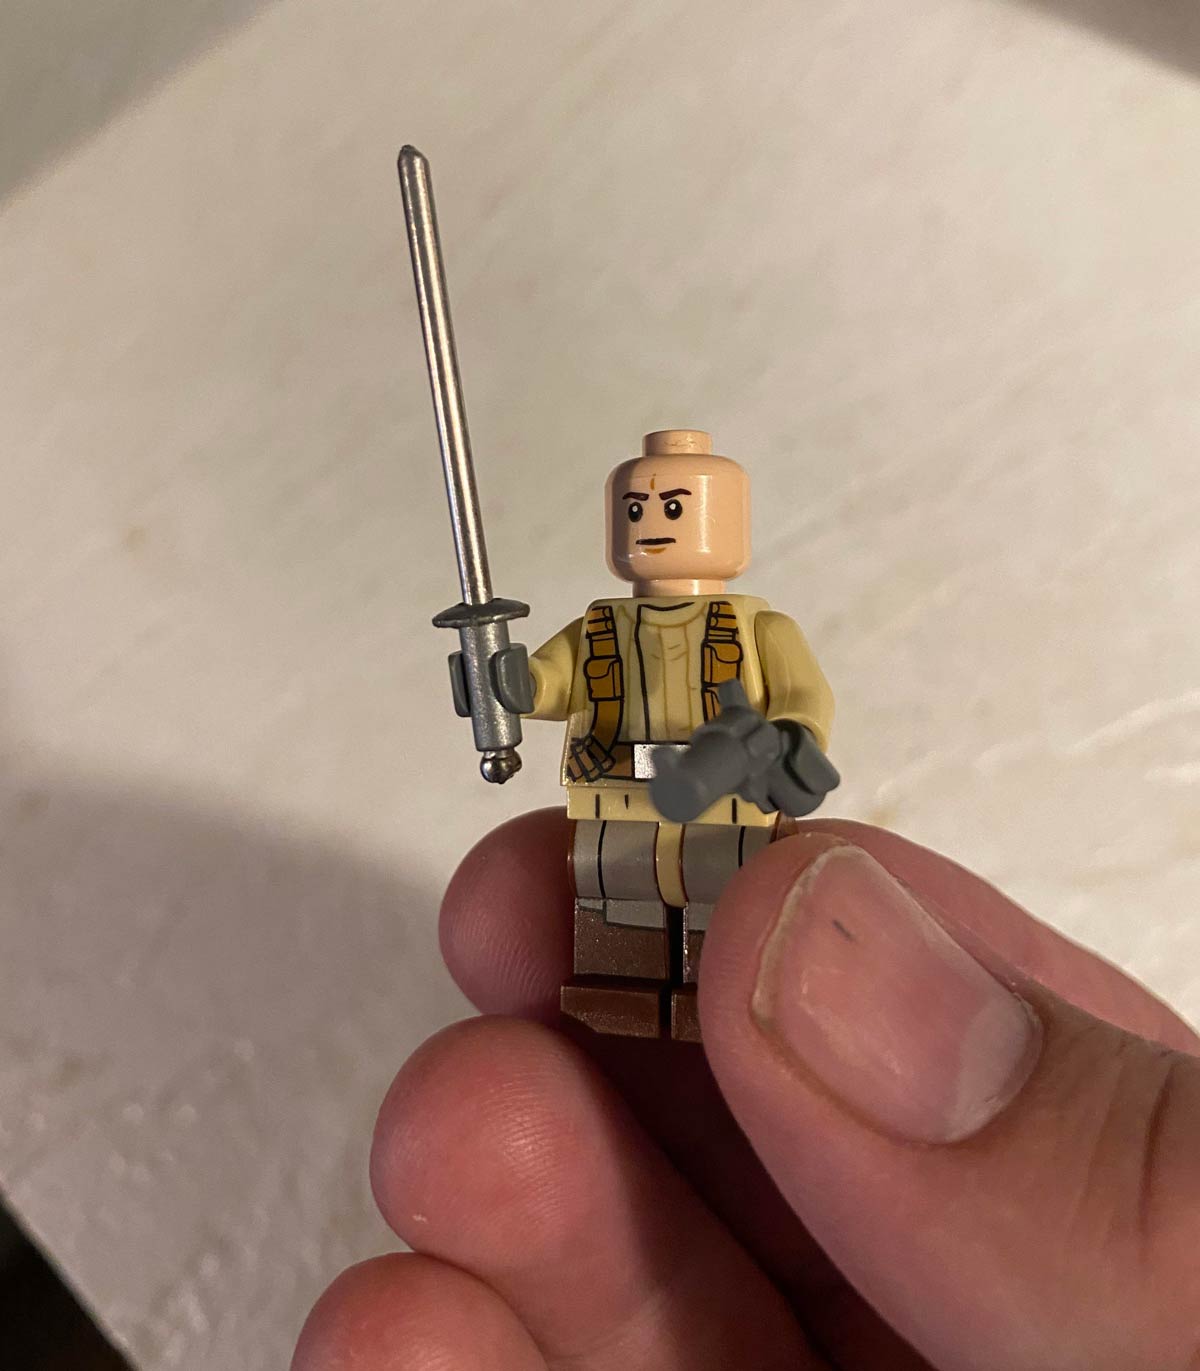 Piece of a broken bicycle spoke I found on the ground works perfectly as a Lego sword